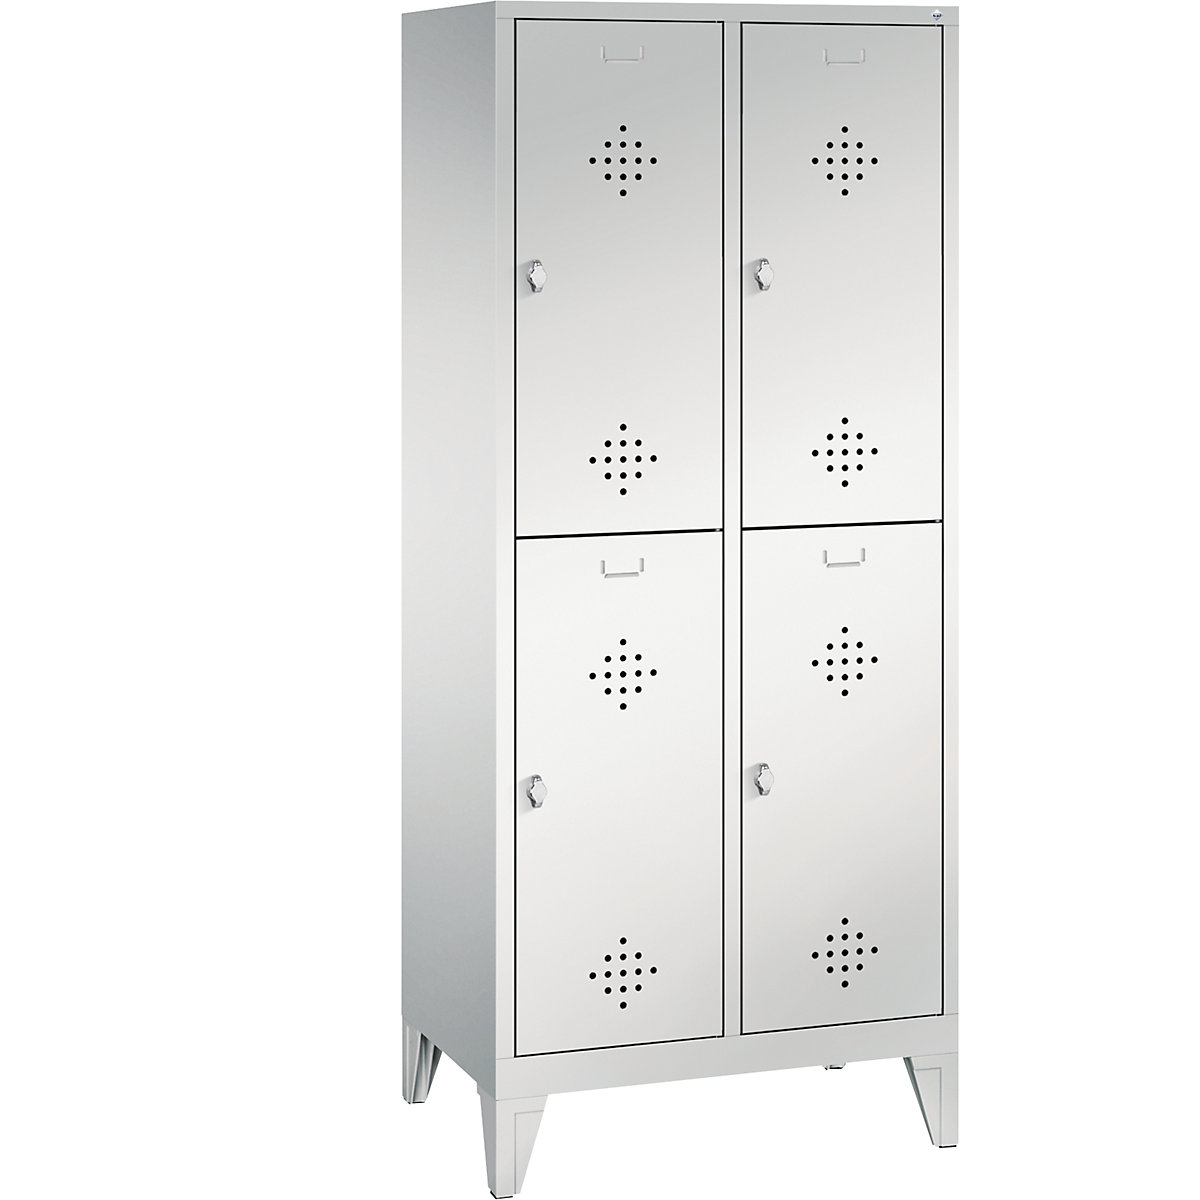 CLASSIC cloakroom locker with feet, double tier – C+P, 2 compartments, 2 shelf compartments each, compartment width 400 mm, light grey-13